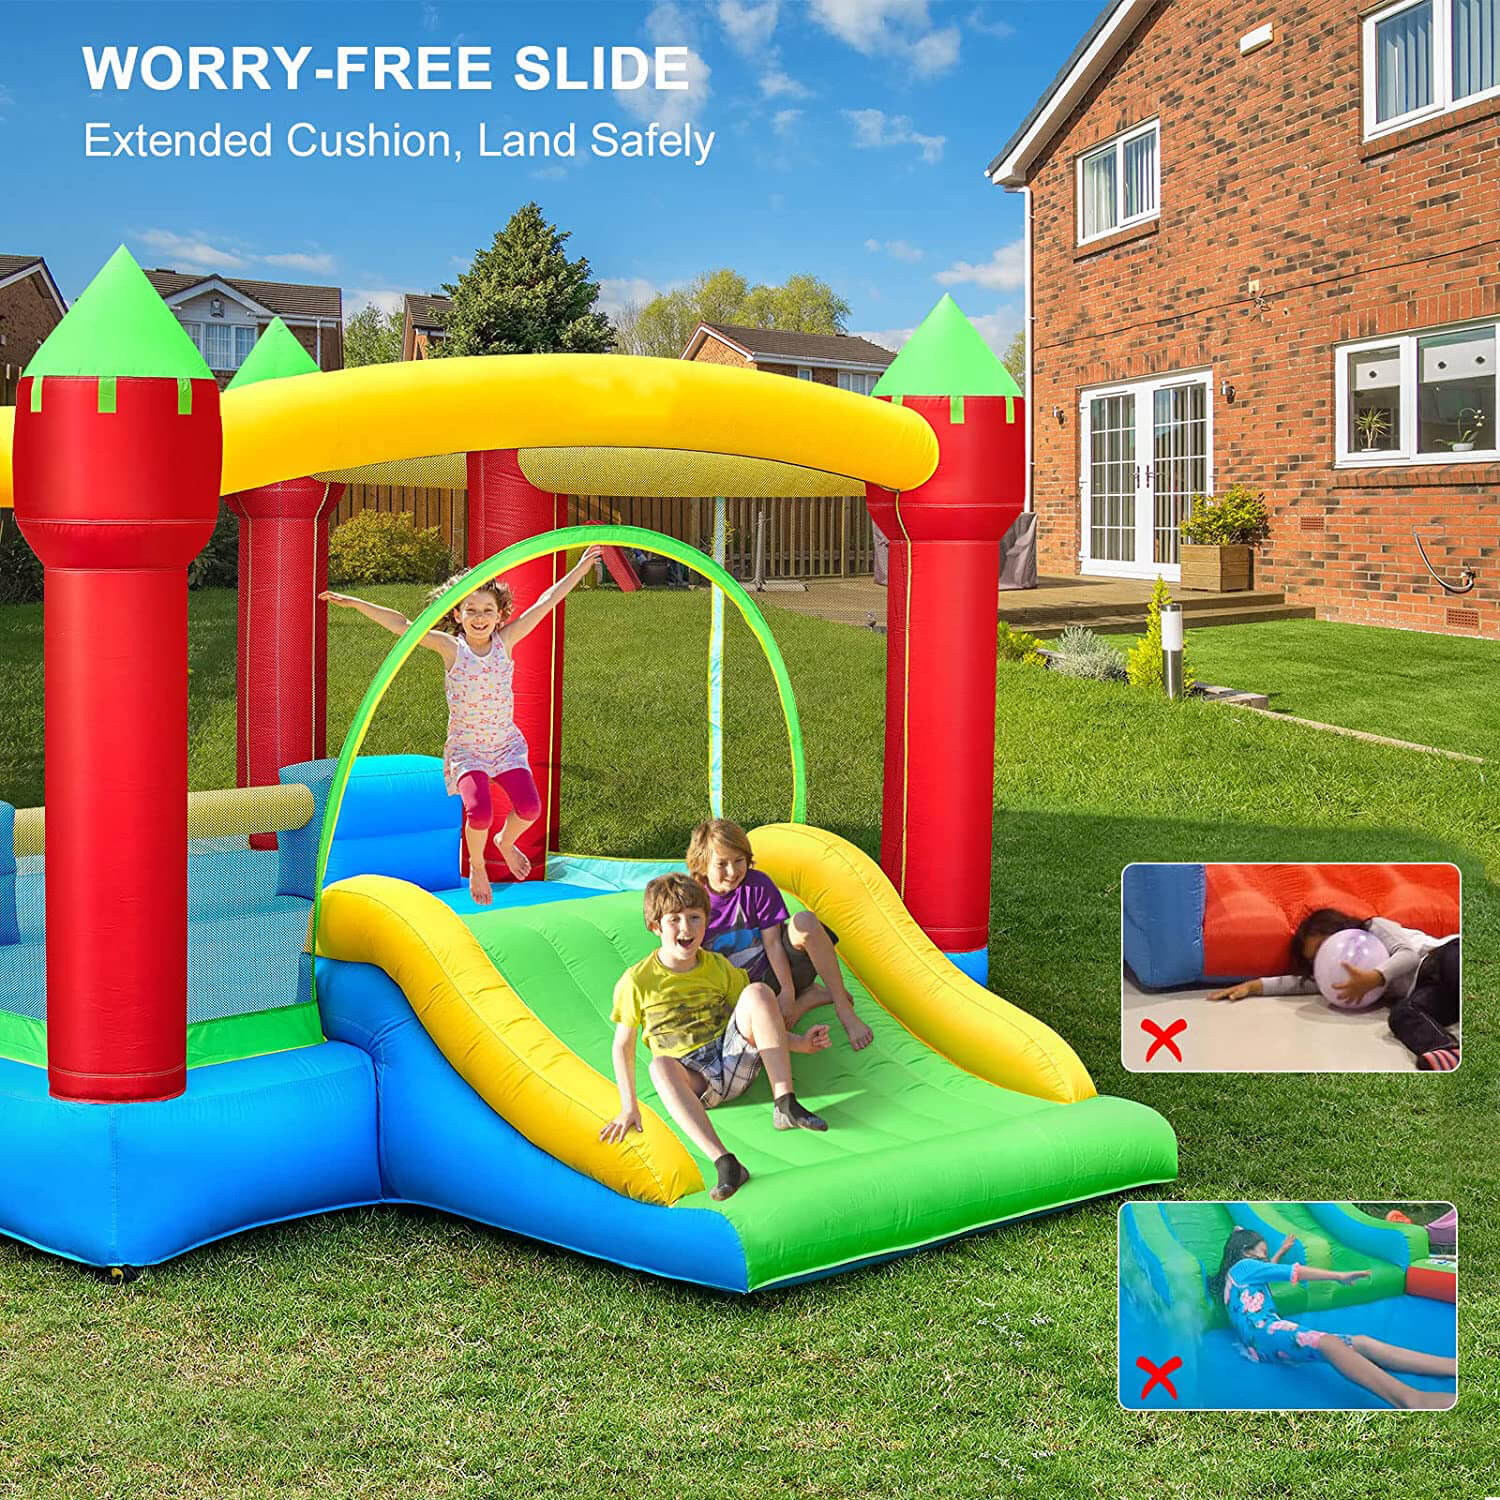 Large Inflatable Bounce House for 6 Kids with Blower & Slide